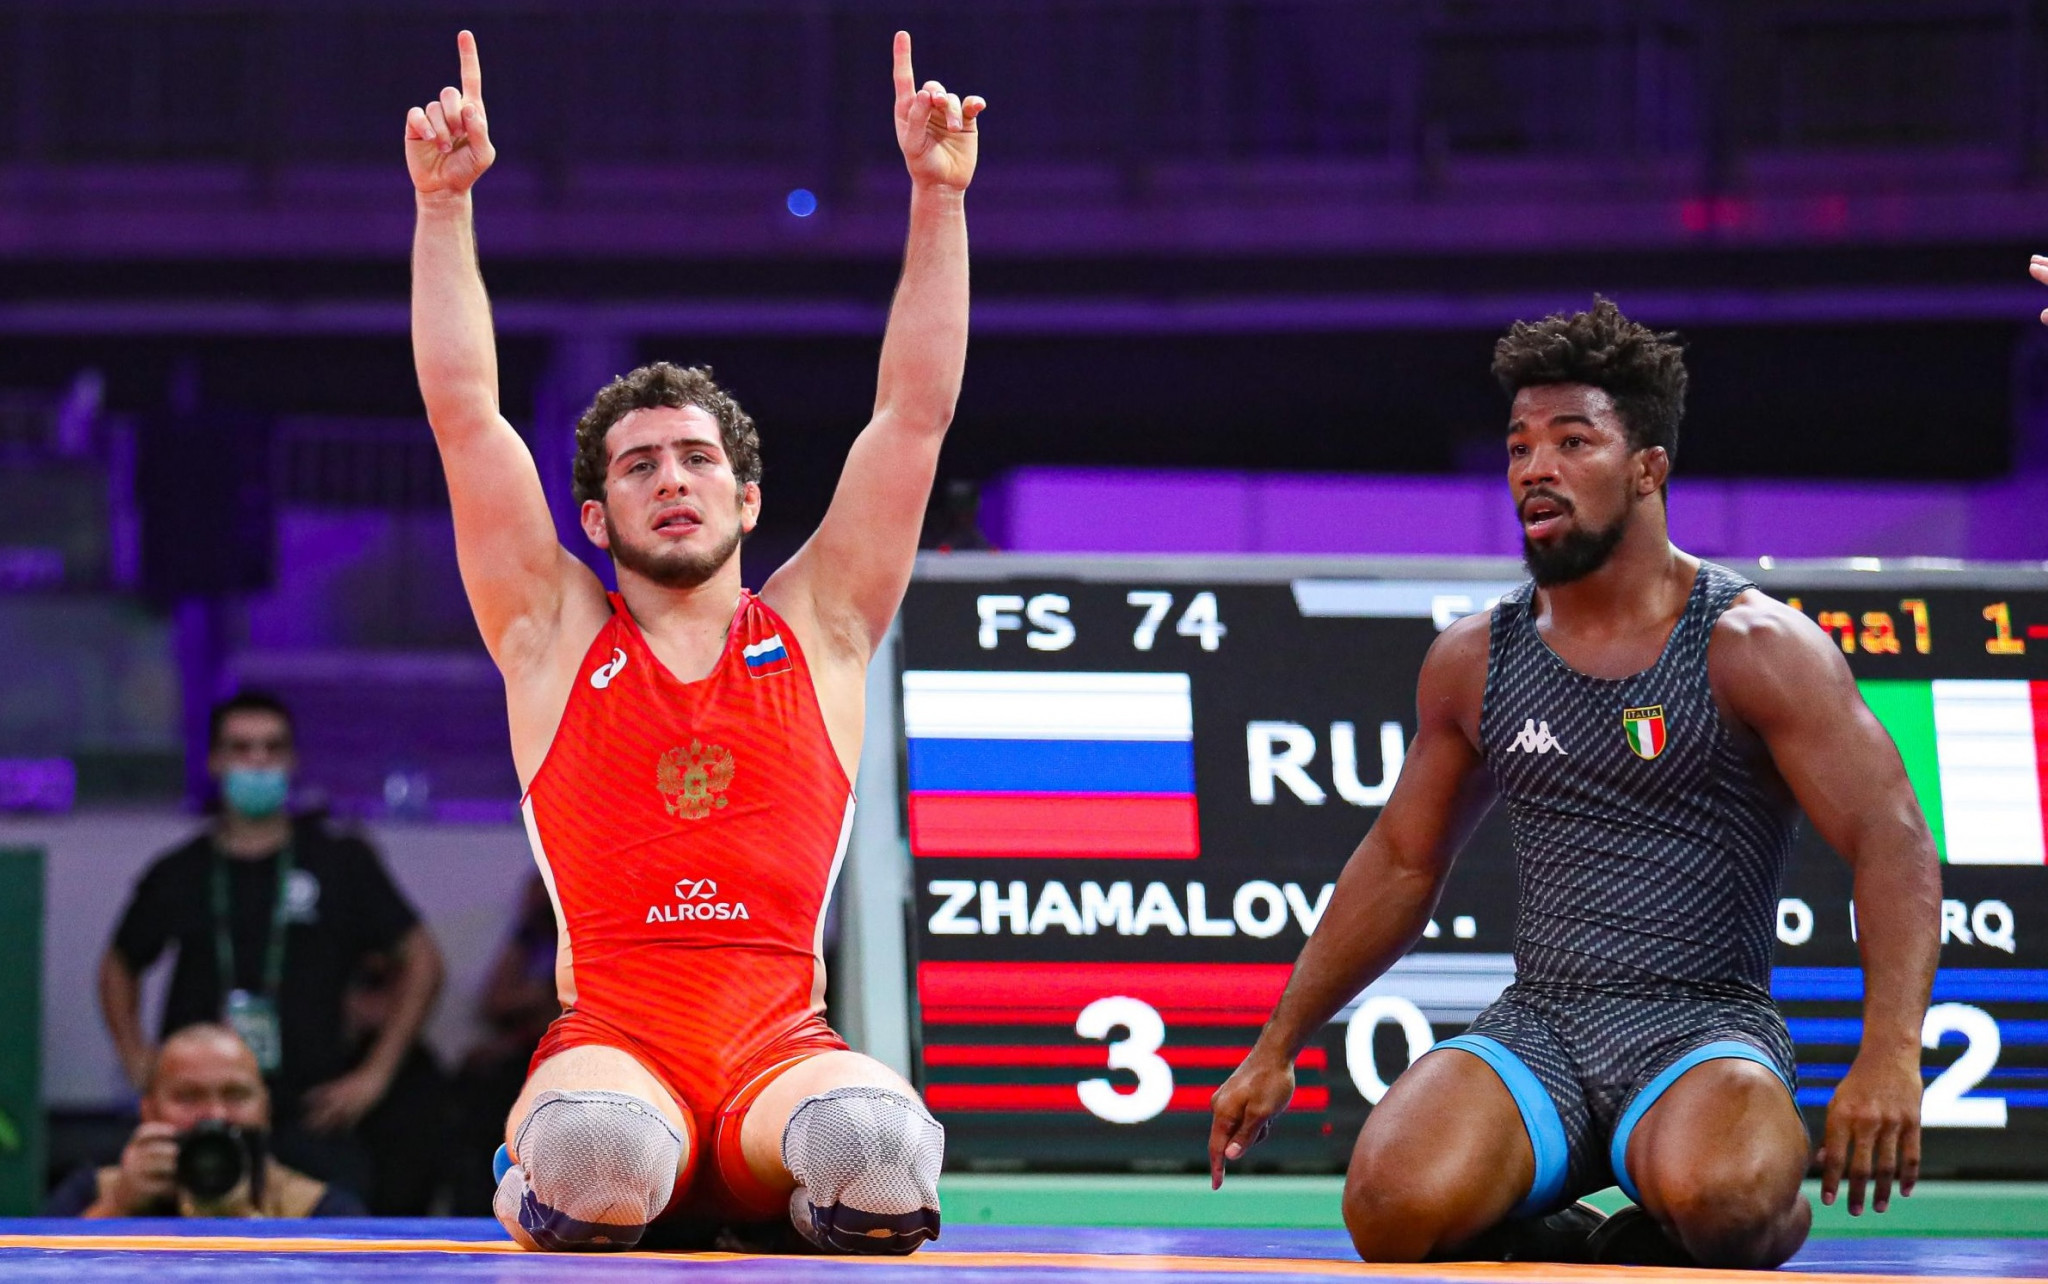 Razambek Zhamalov dramatically defeated Frank Chamizo Marquez in the 74kg category with a two-point action in the final seconds of the contest ©UWW